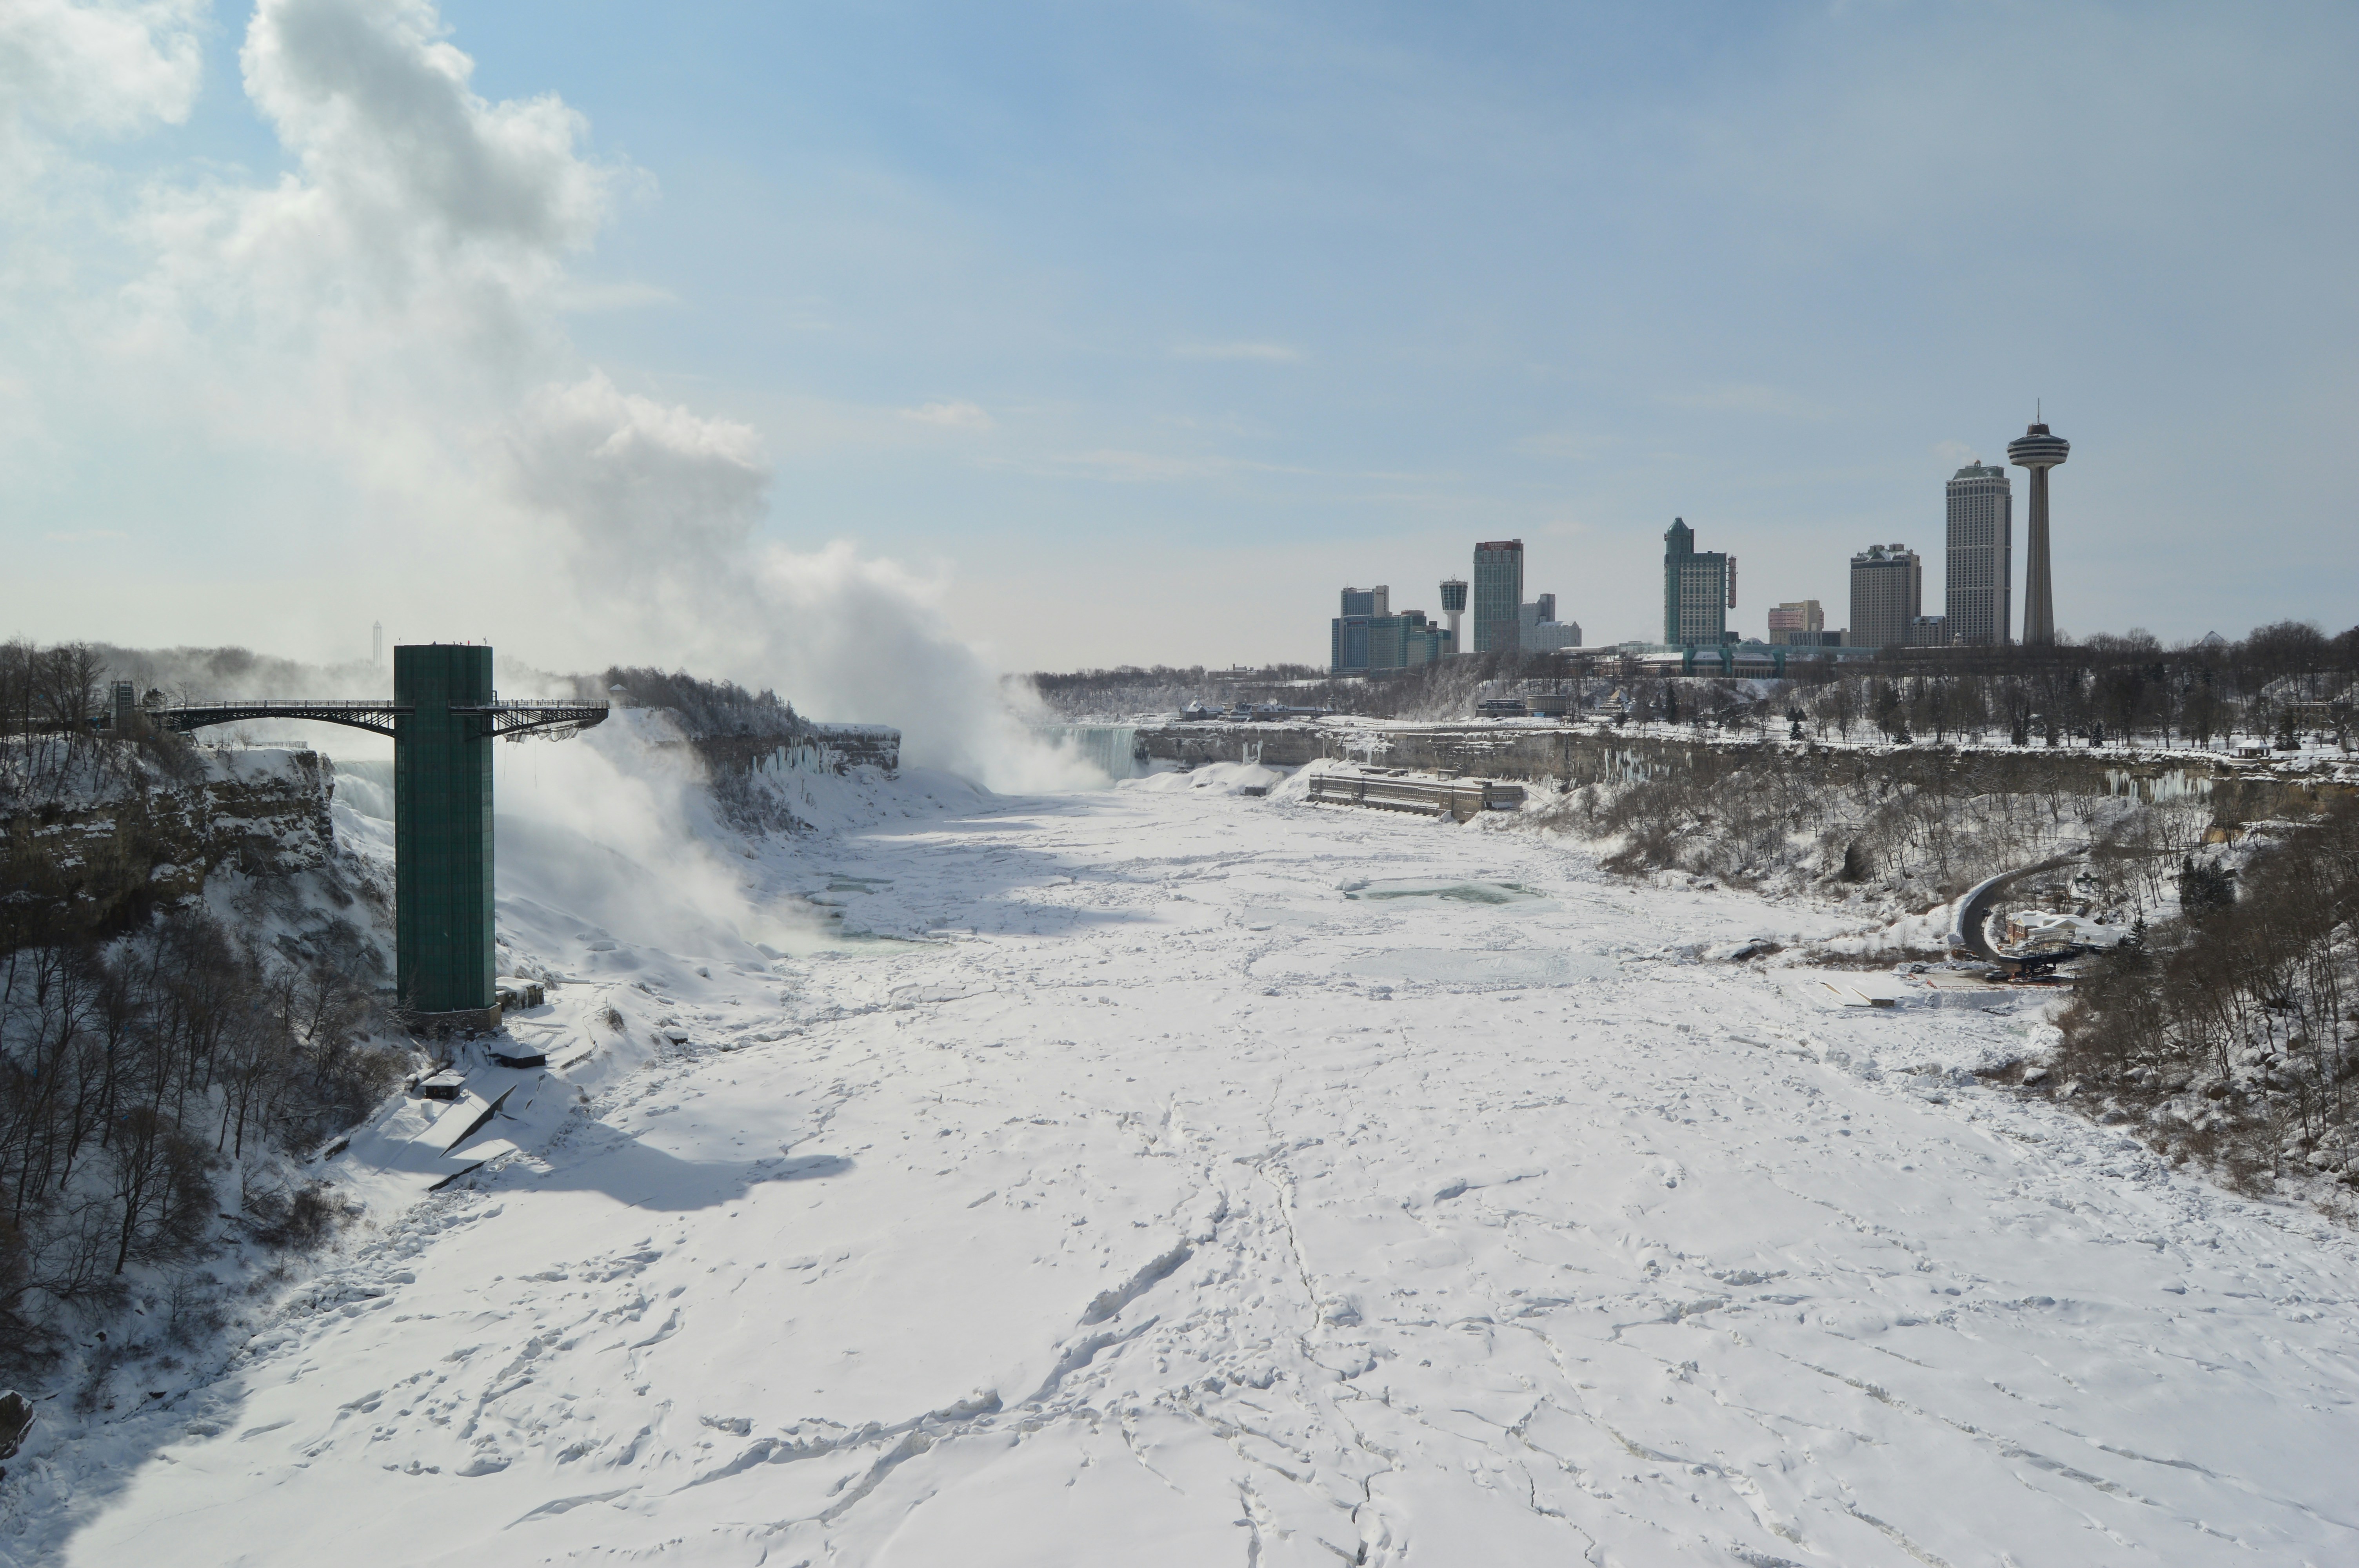 Looking up the frozen Niagara River toward Niagara Falls during the record coldest month in nearby Buffalo New York's climate history. Photo taken from the Rainbow Bridge on the International Boundary between Canada and theUnited States.